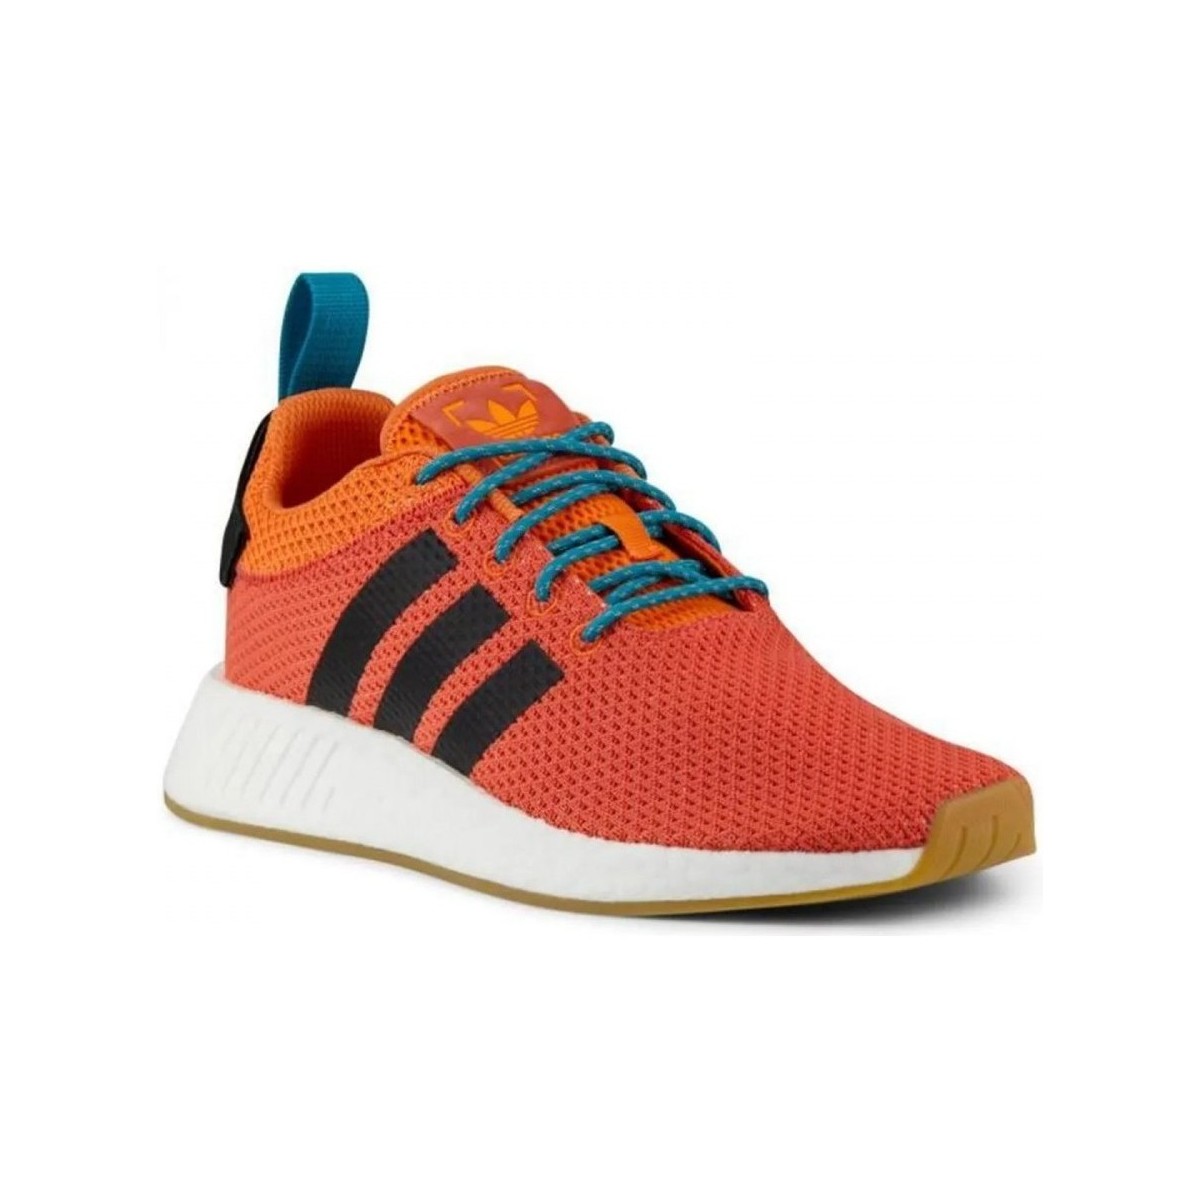 Chaussures Homme adidas summit trainers shoes for women on sale Nmd R2 Summer Orange